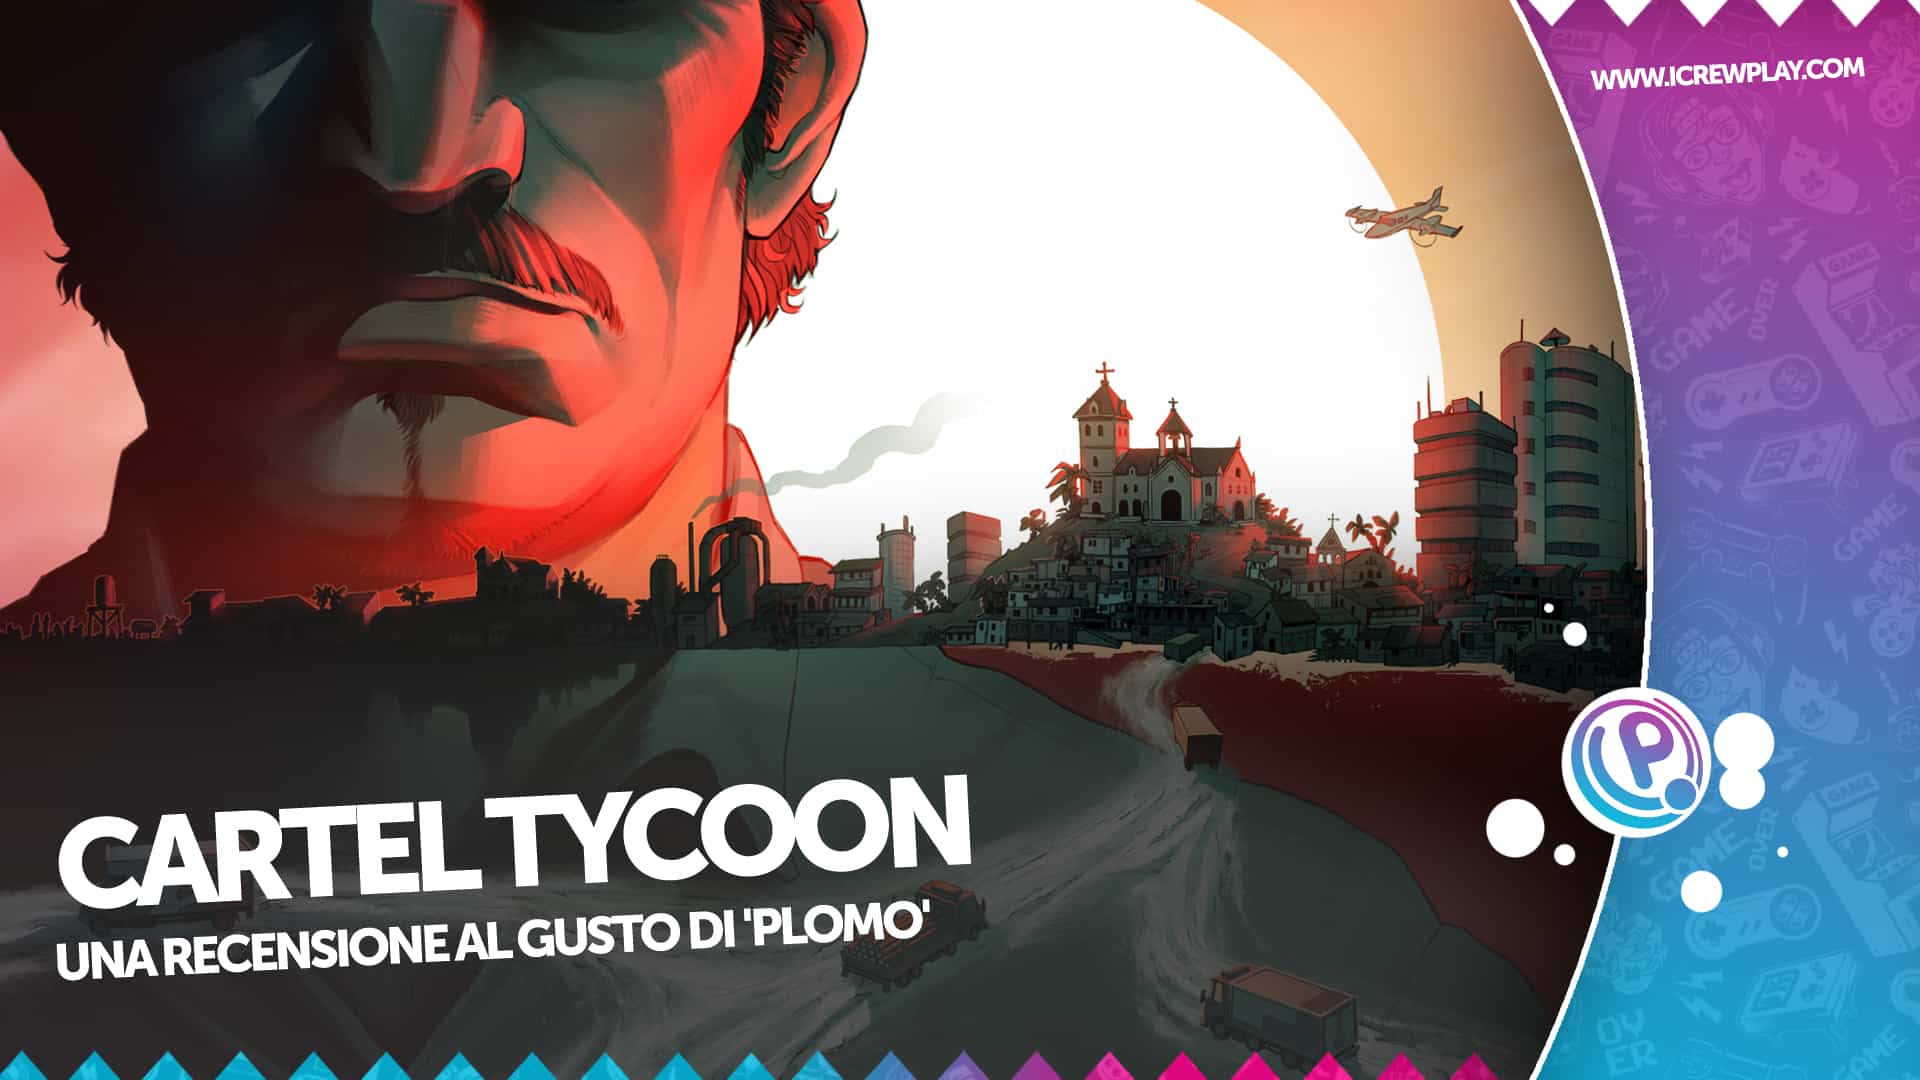 Cartel Tycoon recensione cover